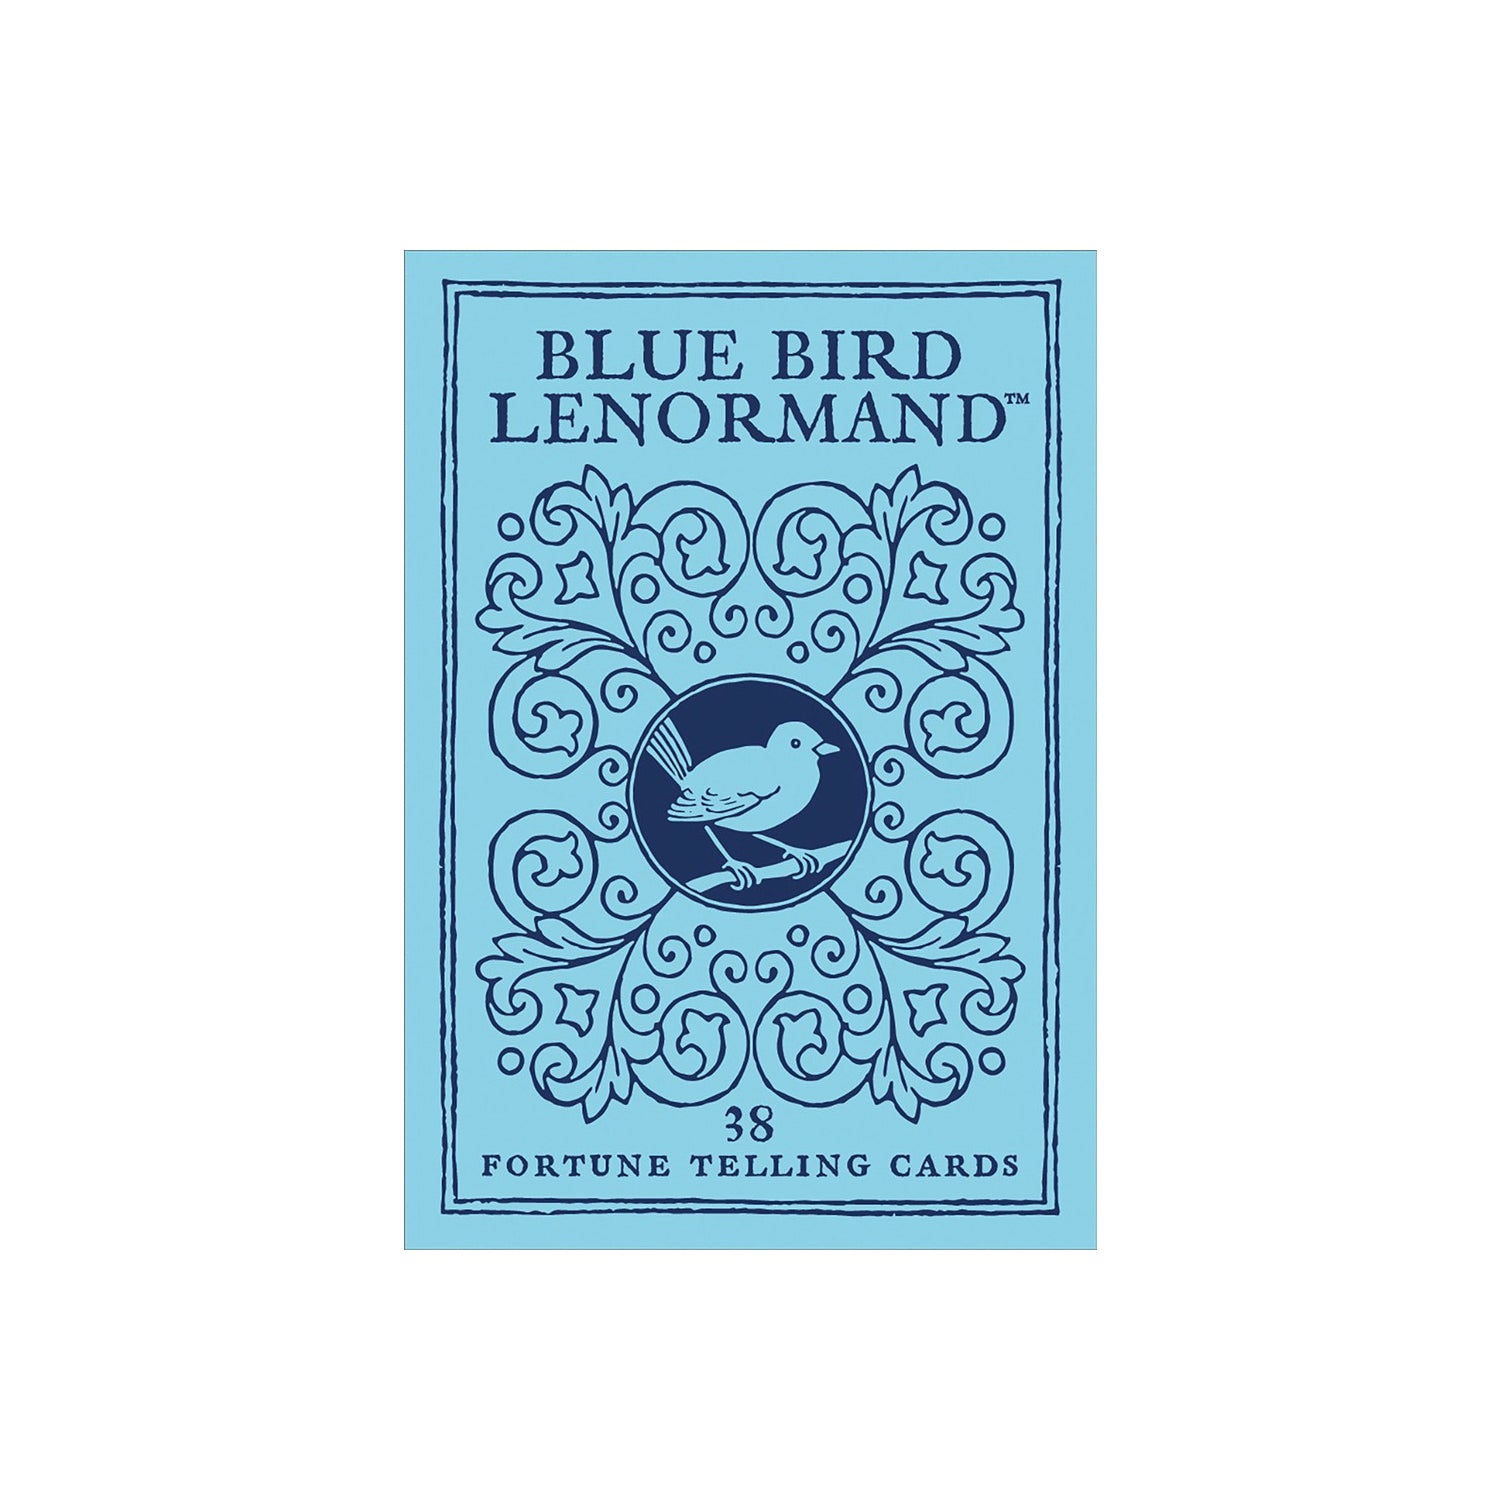 Blue Bird Lenormand Fortune Telling Cards by Stuart Kaplan Playing